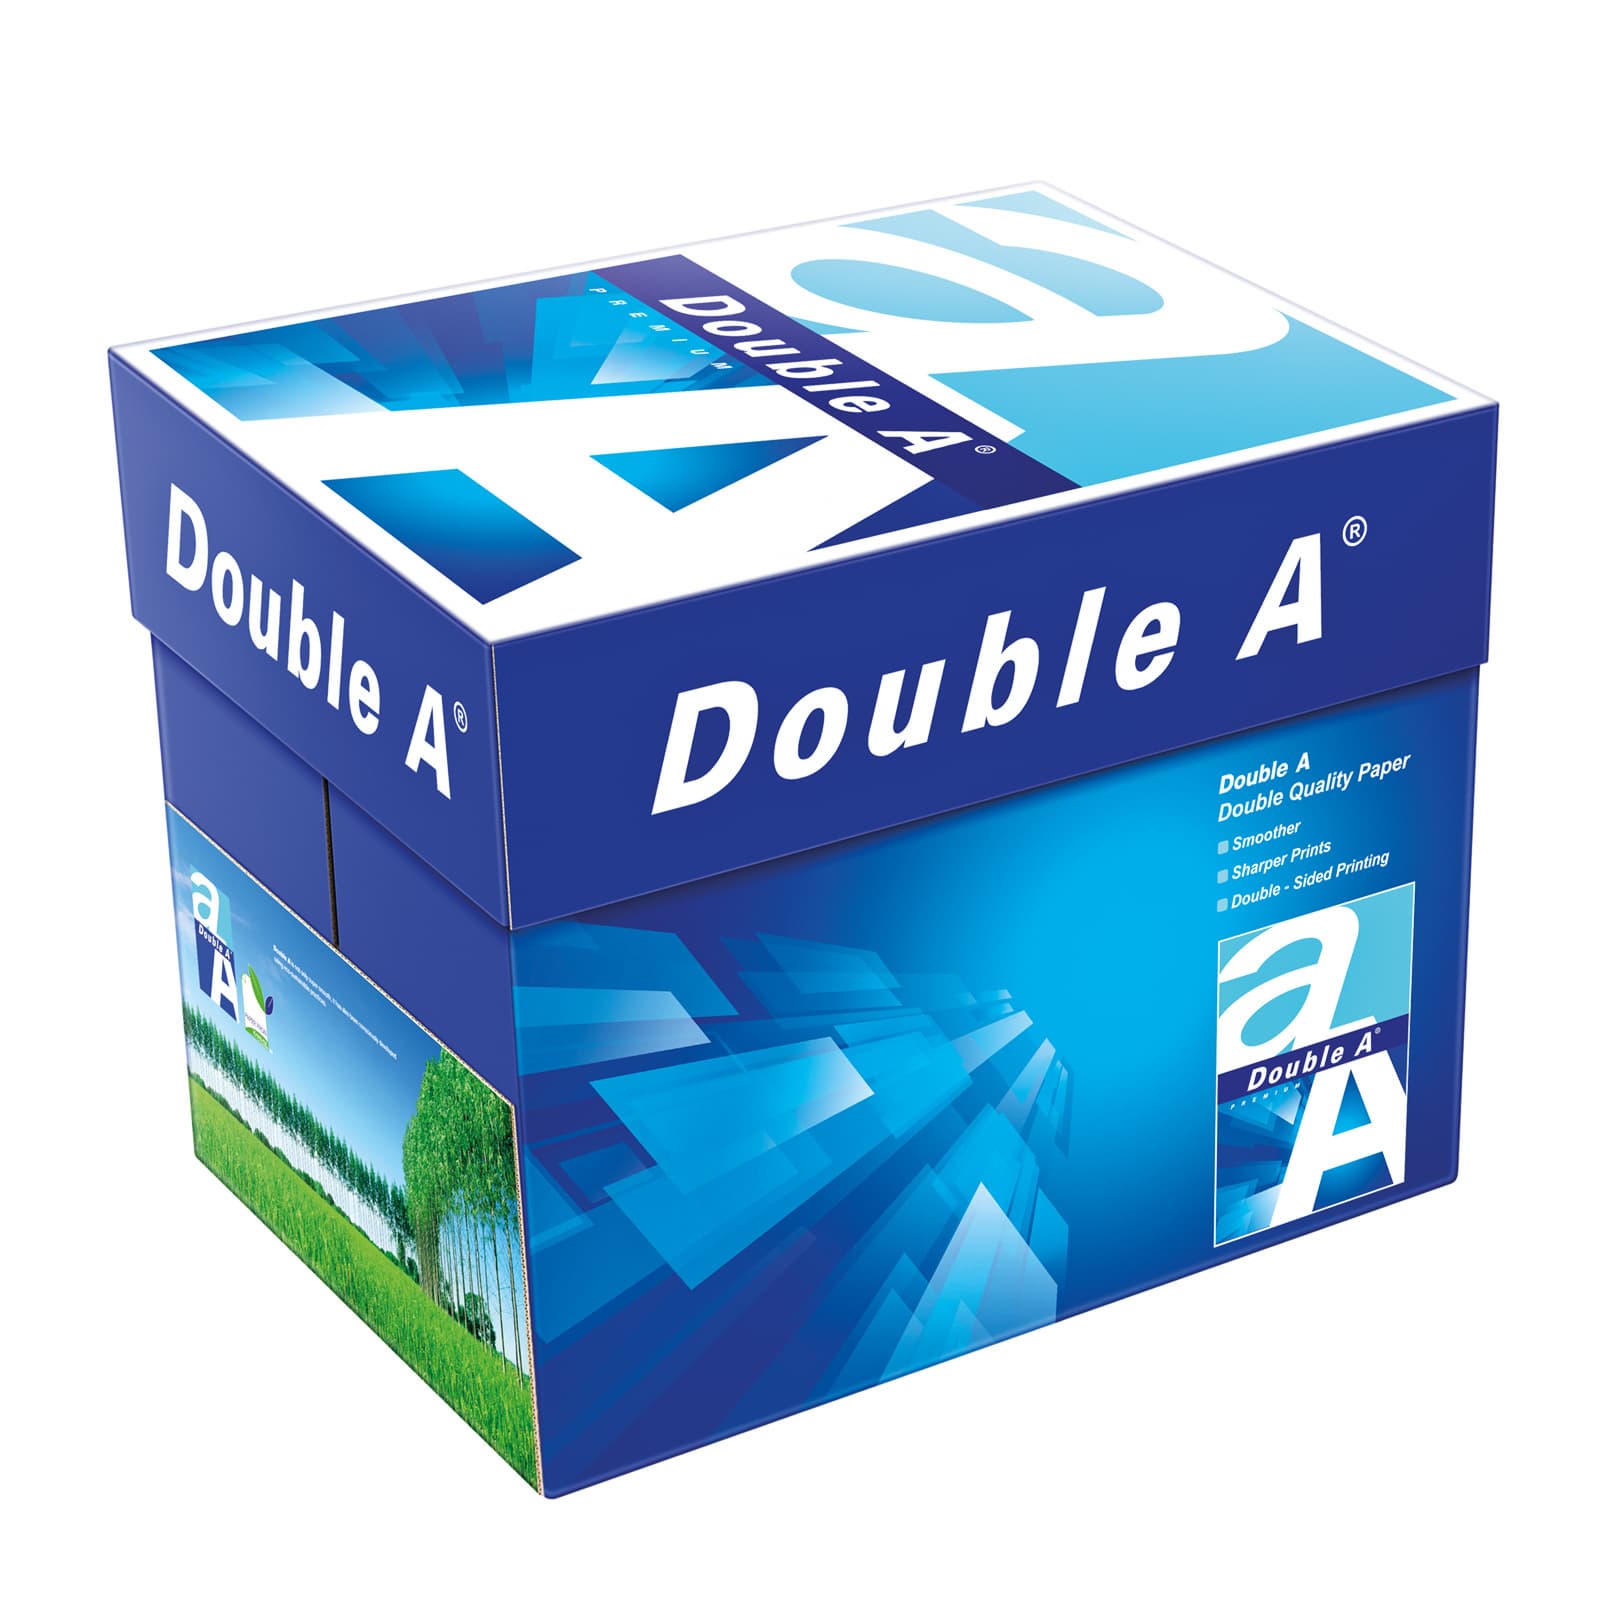 Double A Copy Multipurpose A4 Office Copier Printing Paper